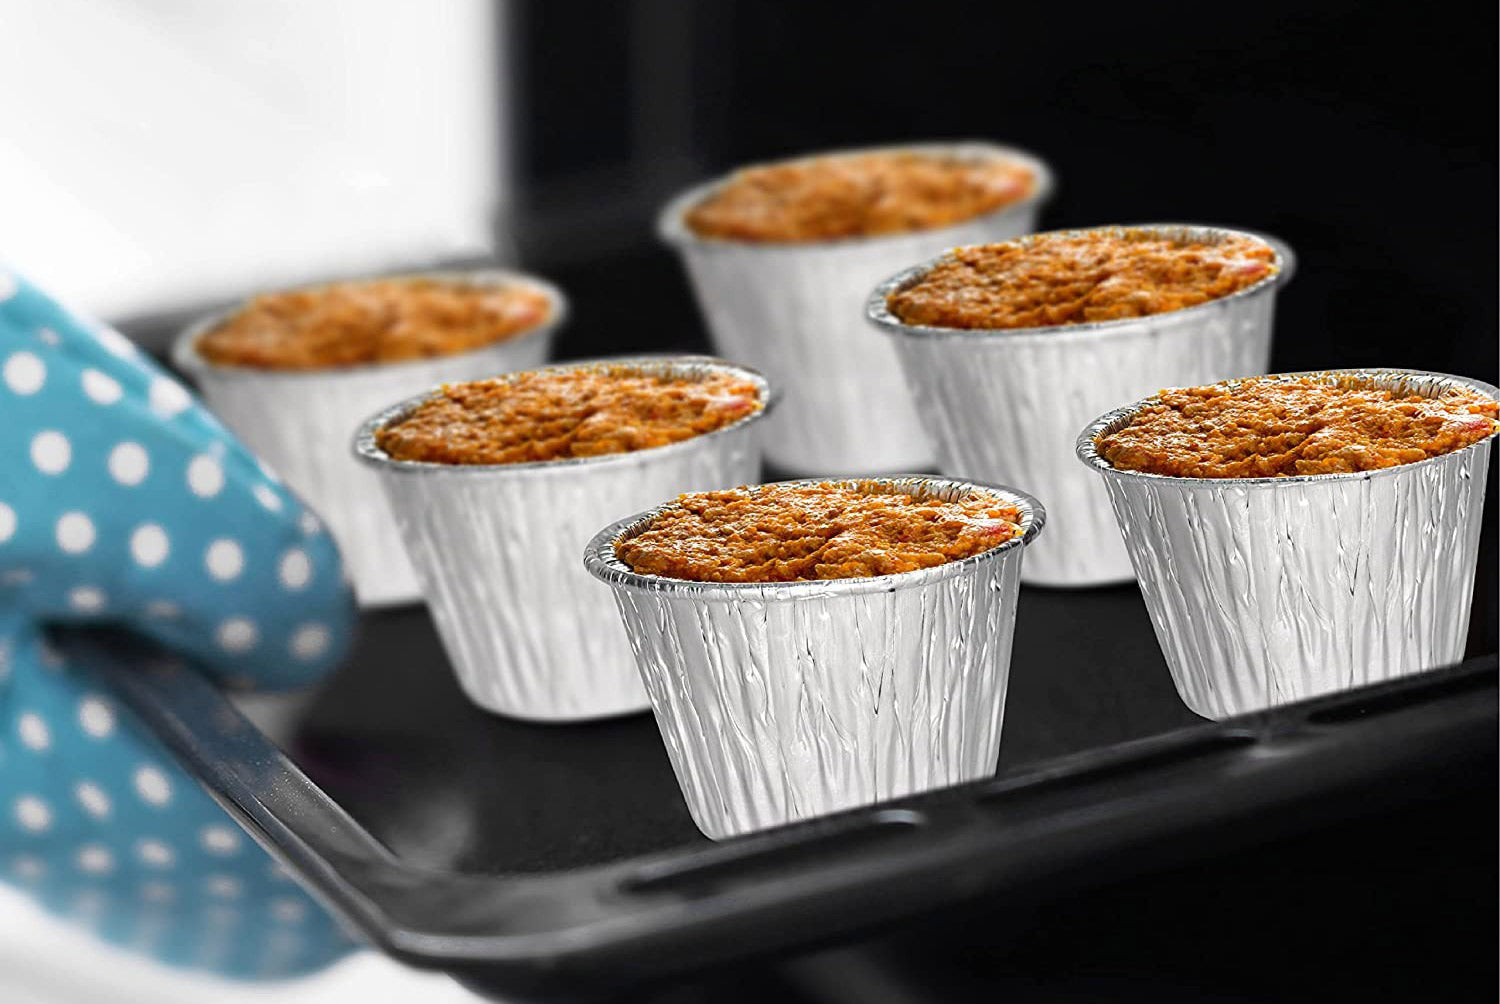 Reusable Round Foil Foil Pie Dishes can withstand up to 400°C temperature